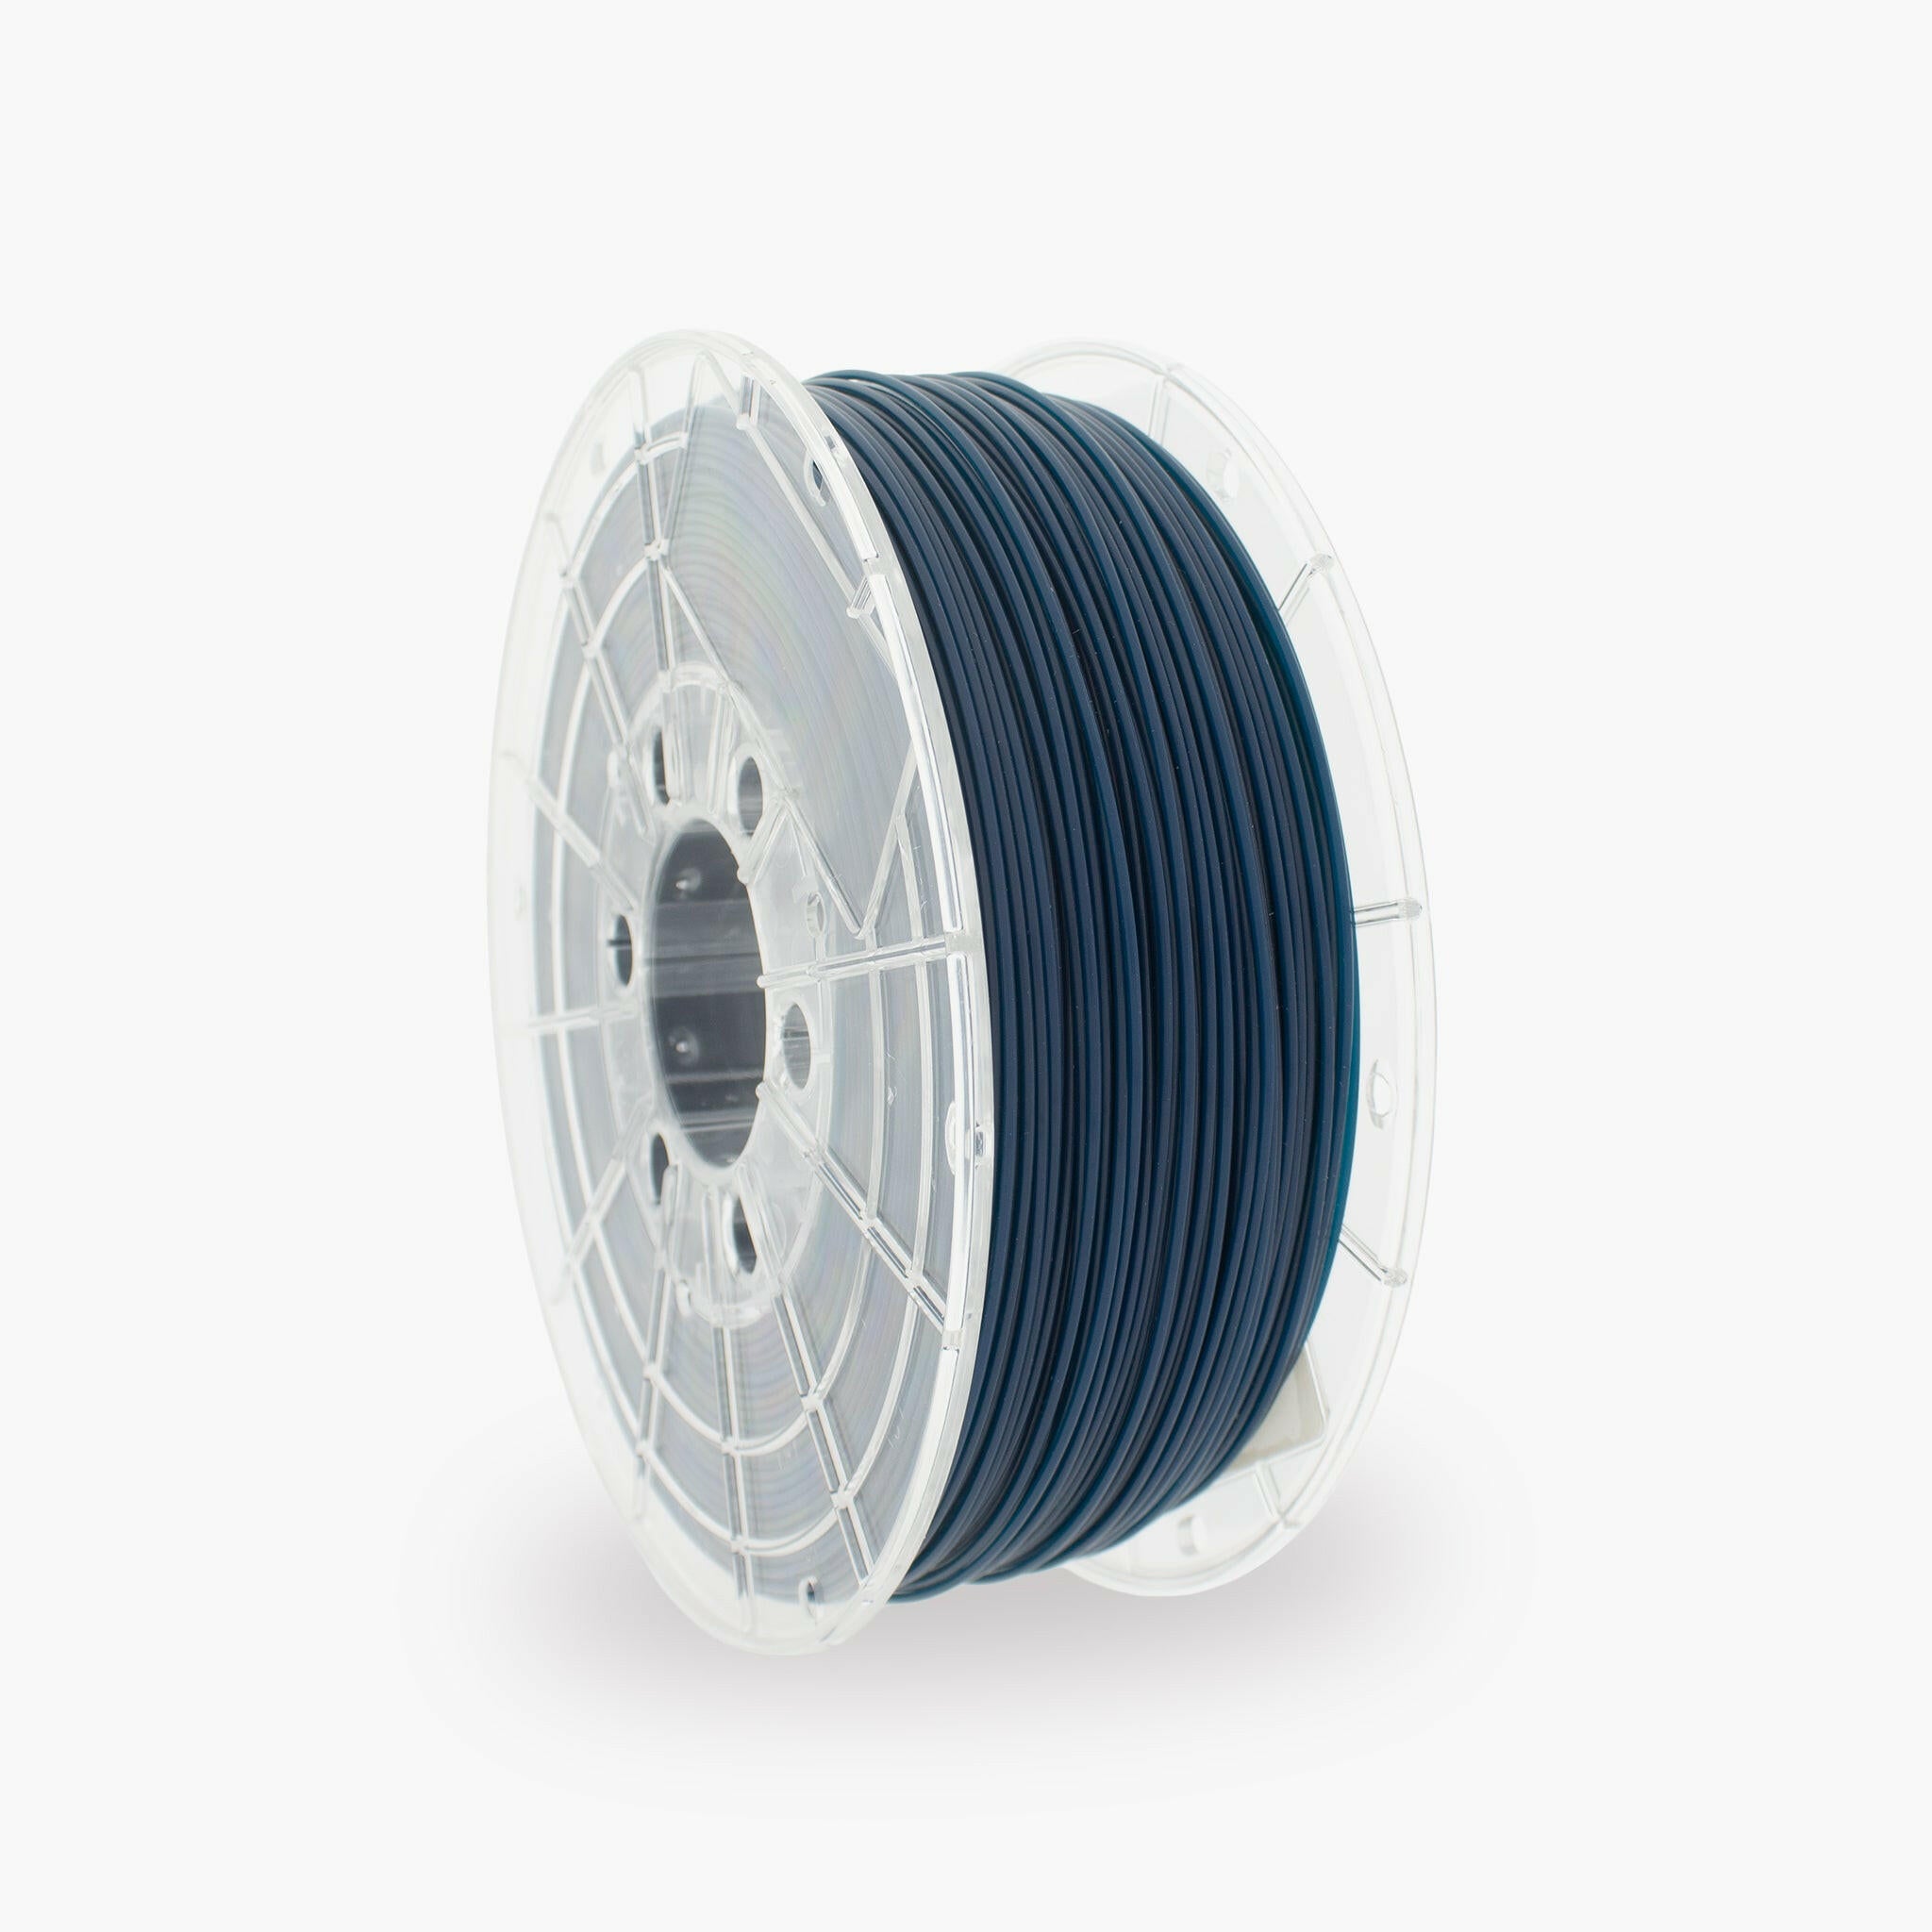 Steel Blue PLA 3D Printer Filament with a diameter of 1.75mm on a 1KG Spool.